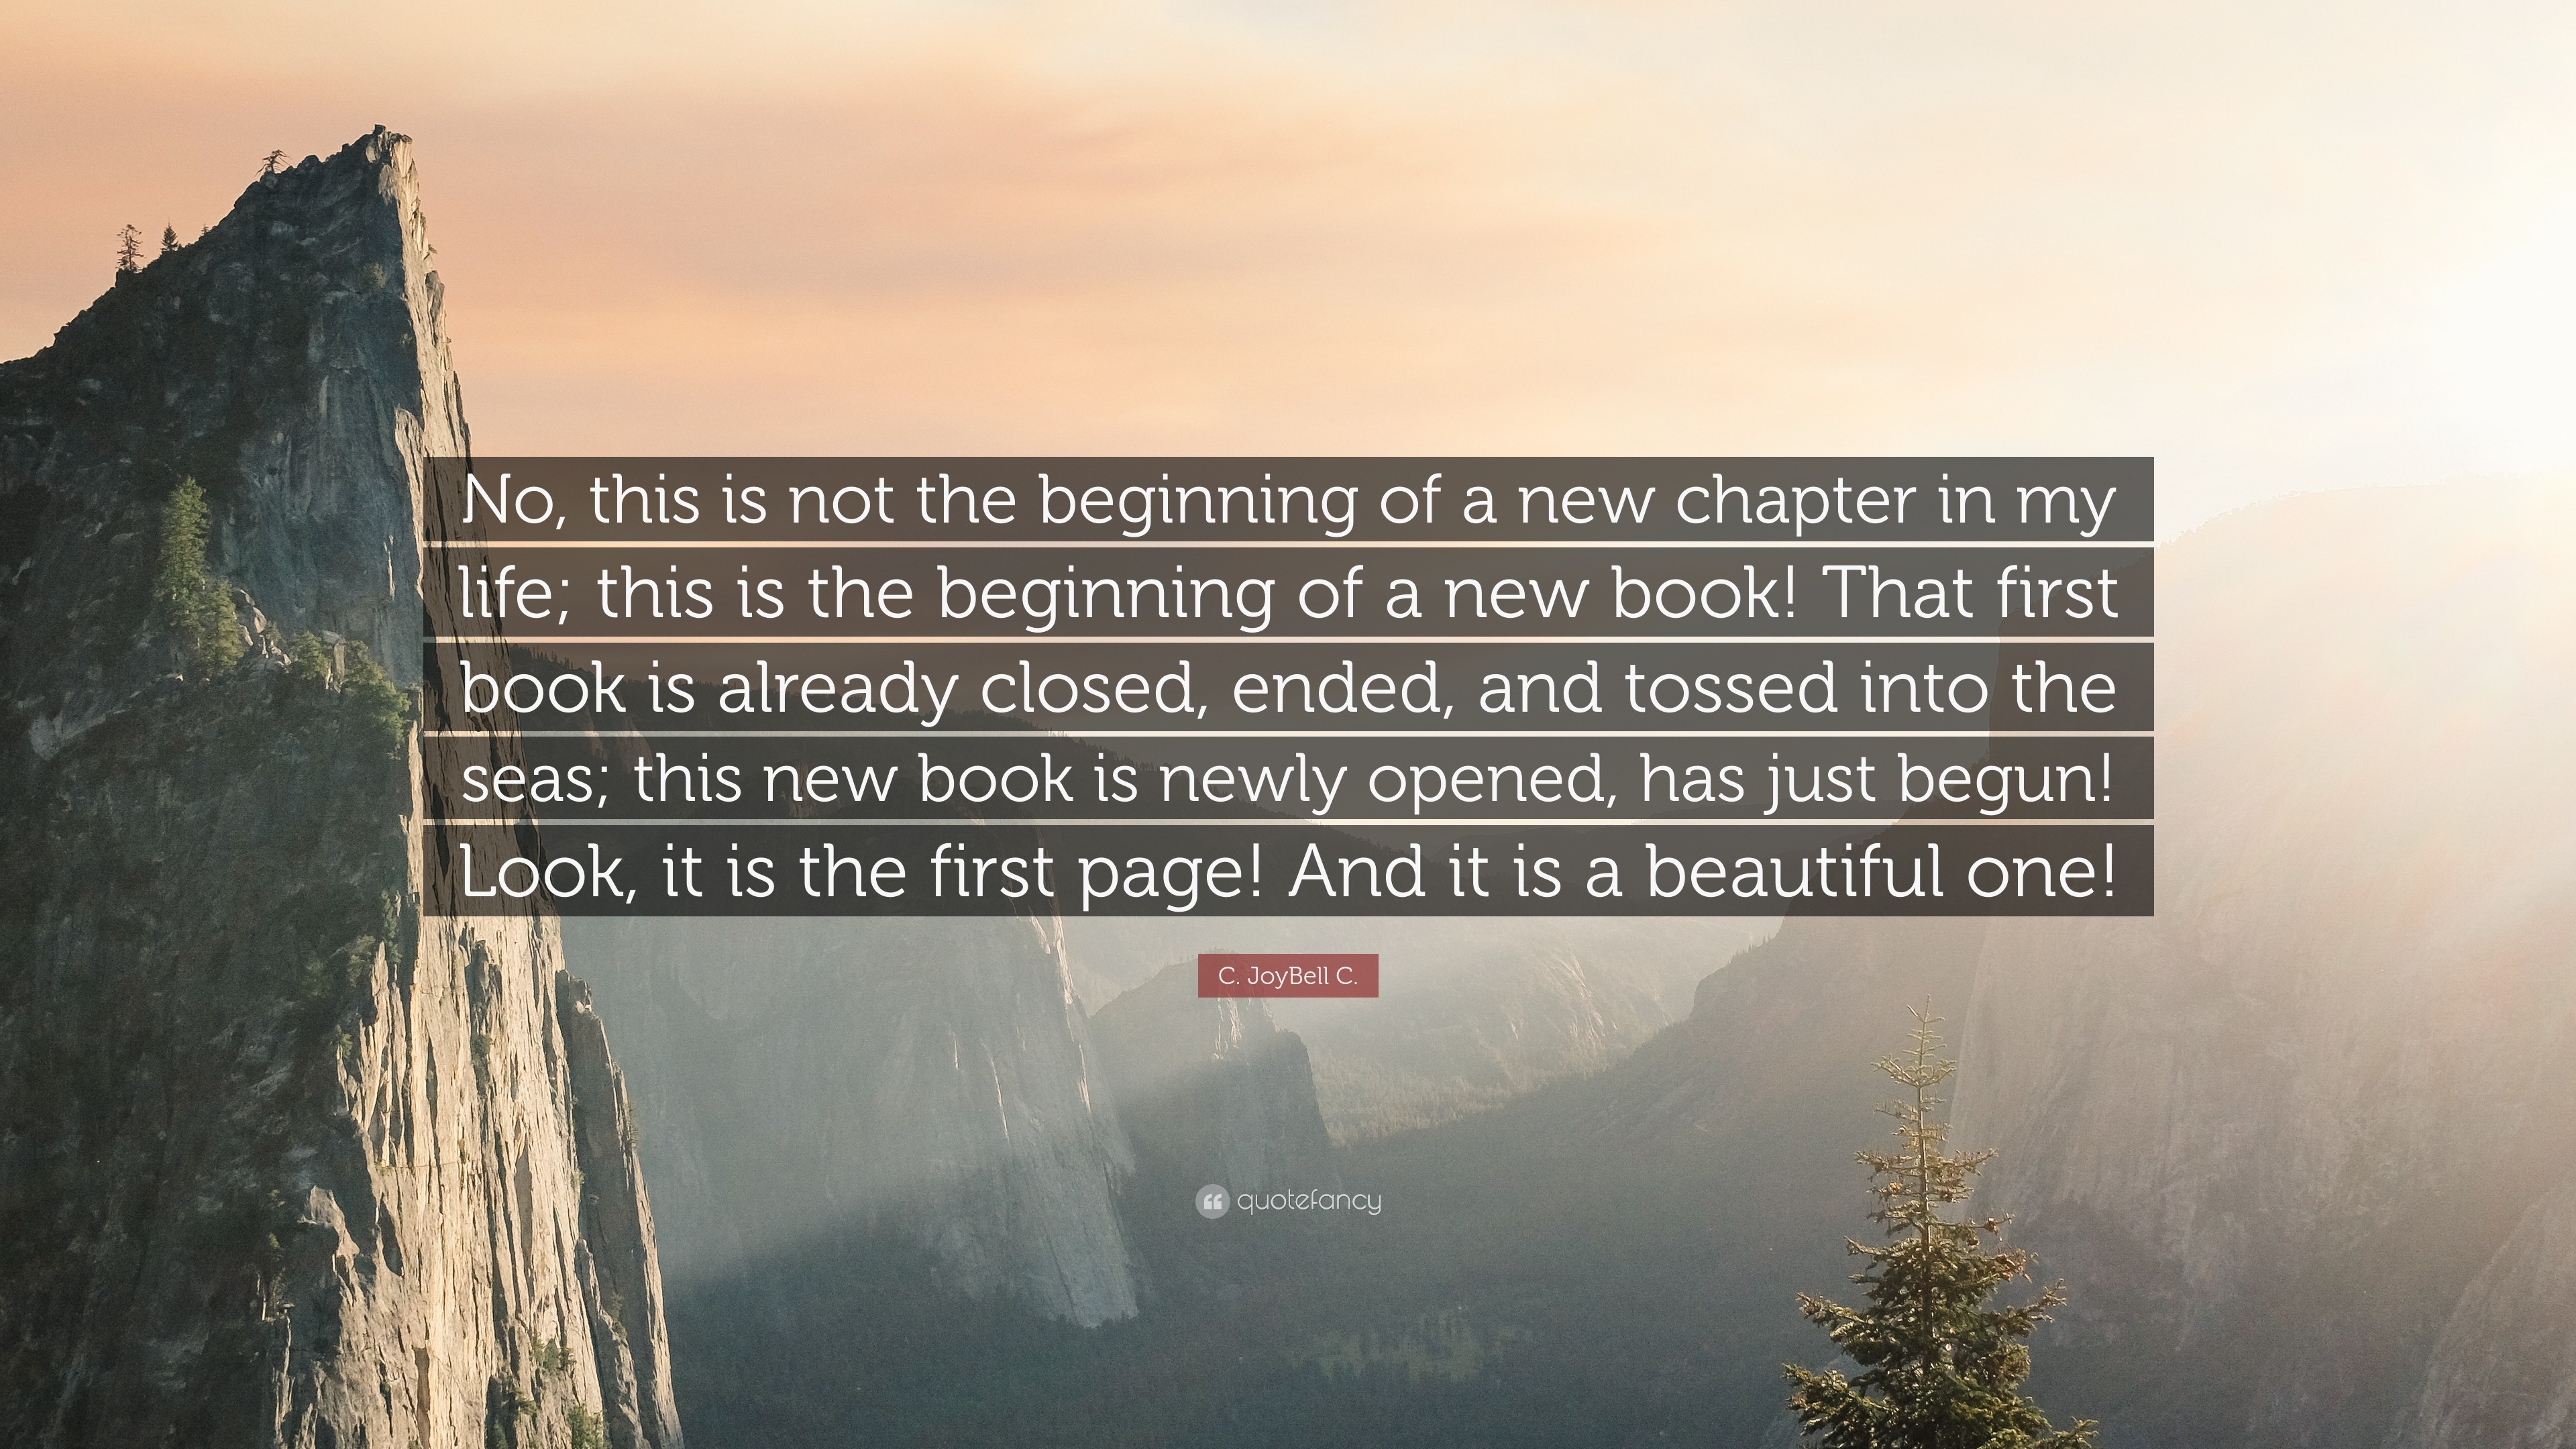 C JoyBell C Quote “No this is not the beginning of